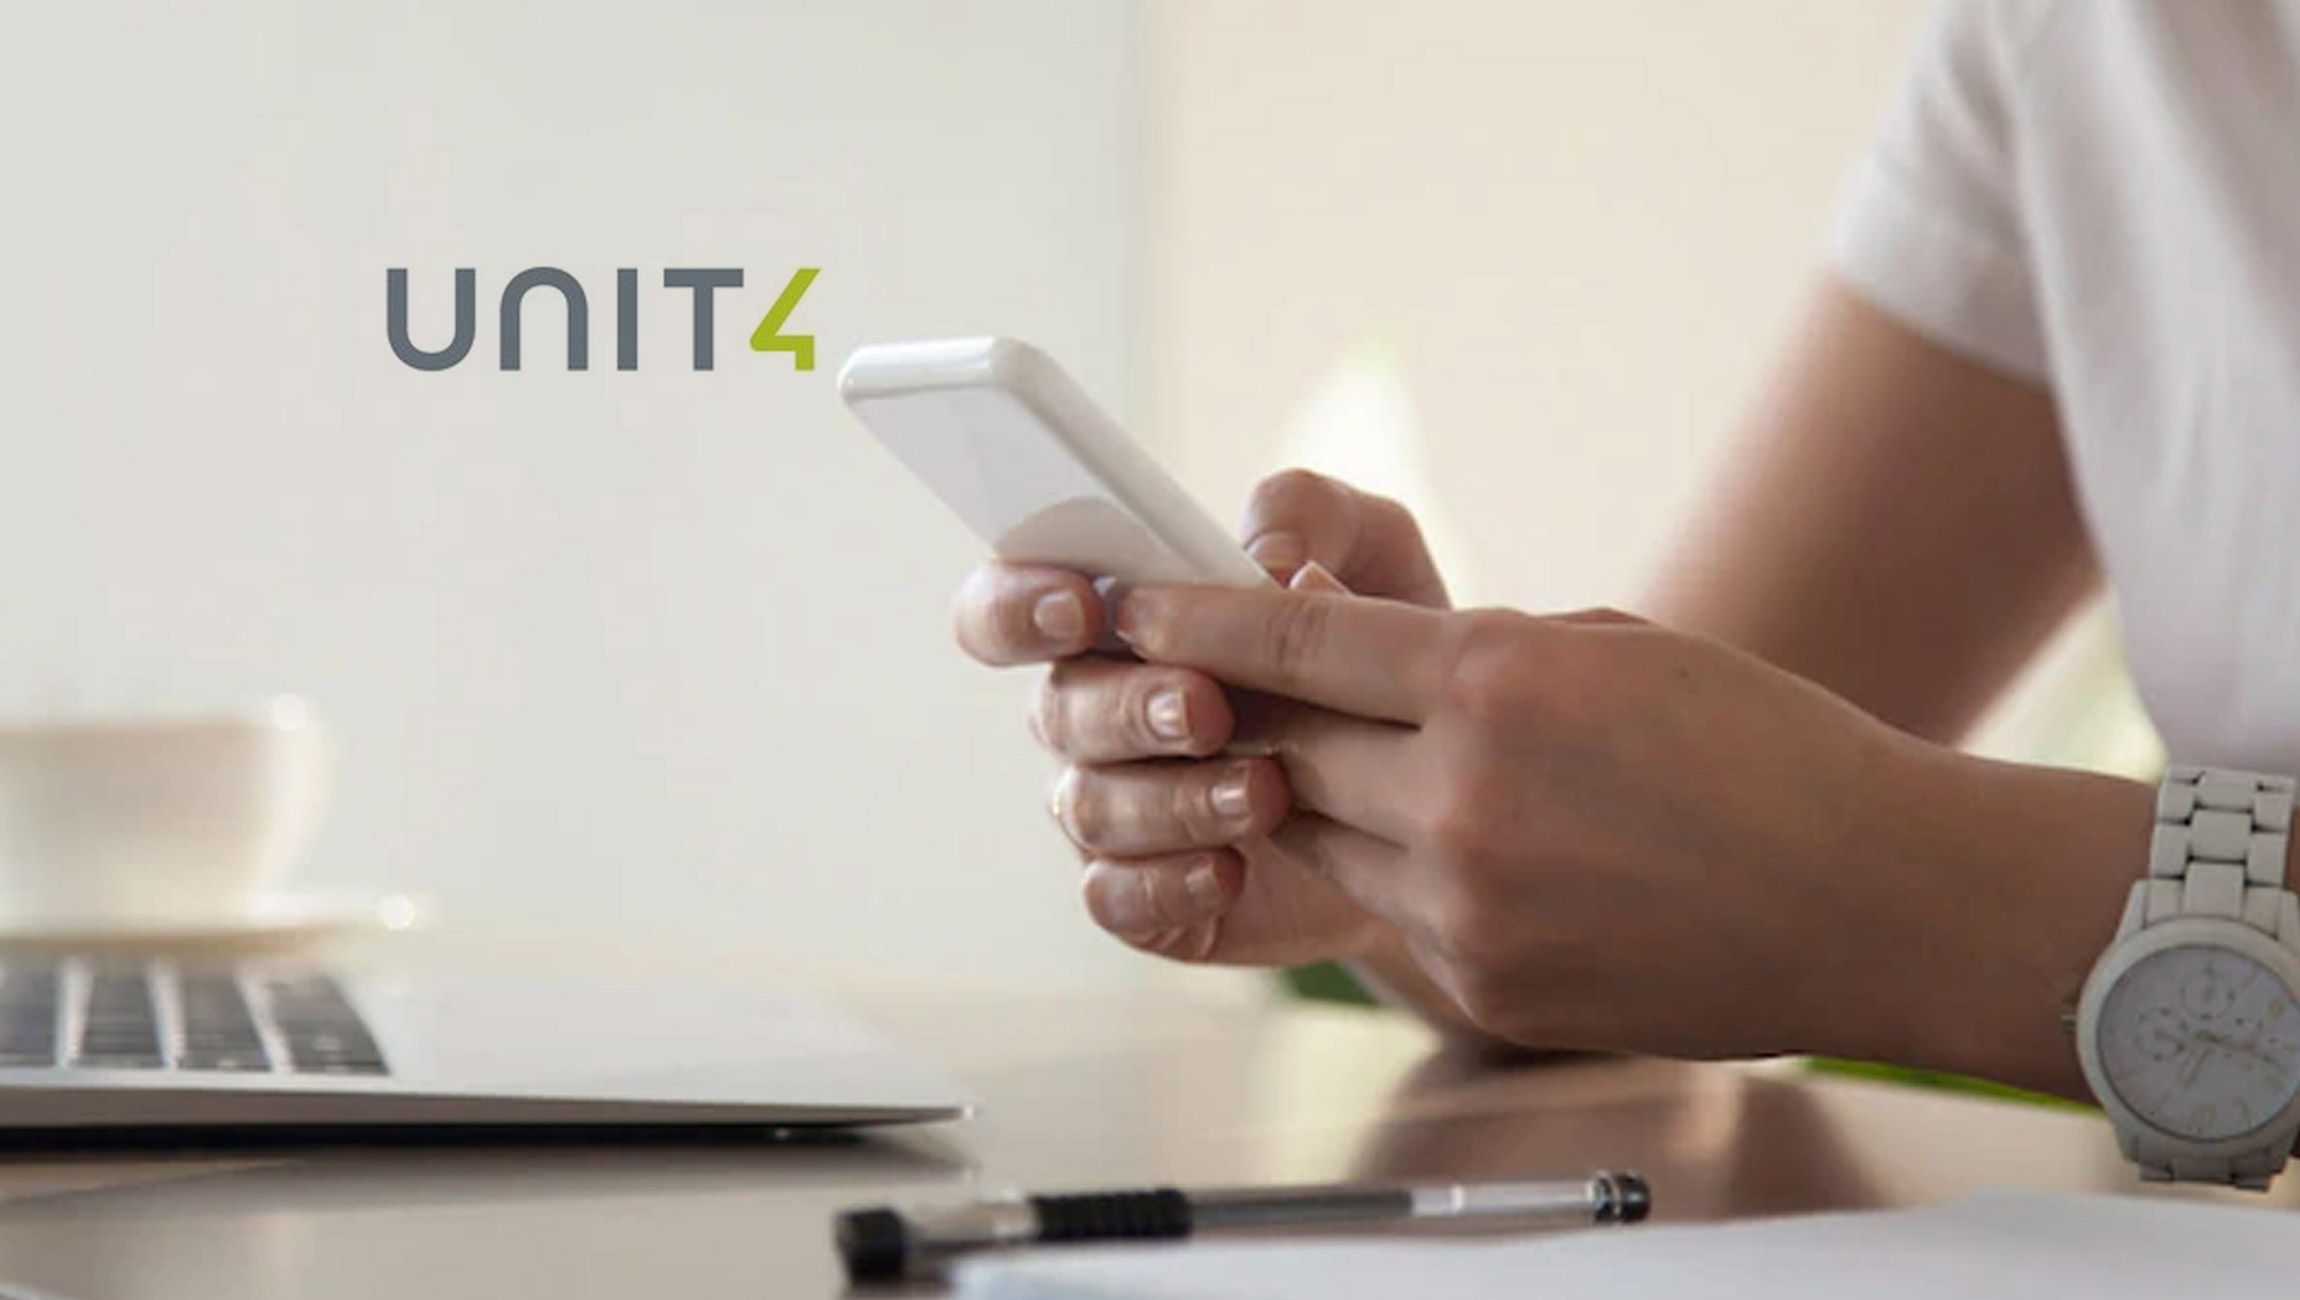 Unit4 Launches New Marketplace Platform to Extend Functionality with Apps and Integrations for E-signing, Credit Ratings and More